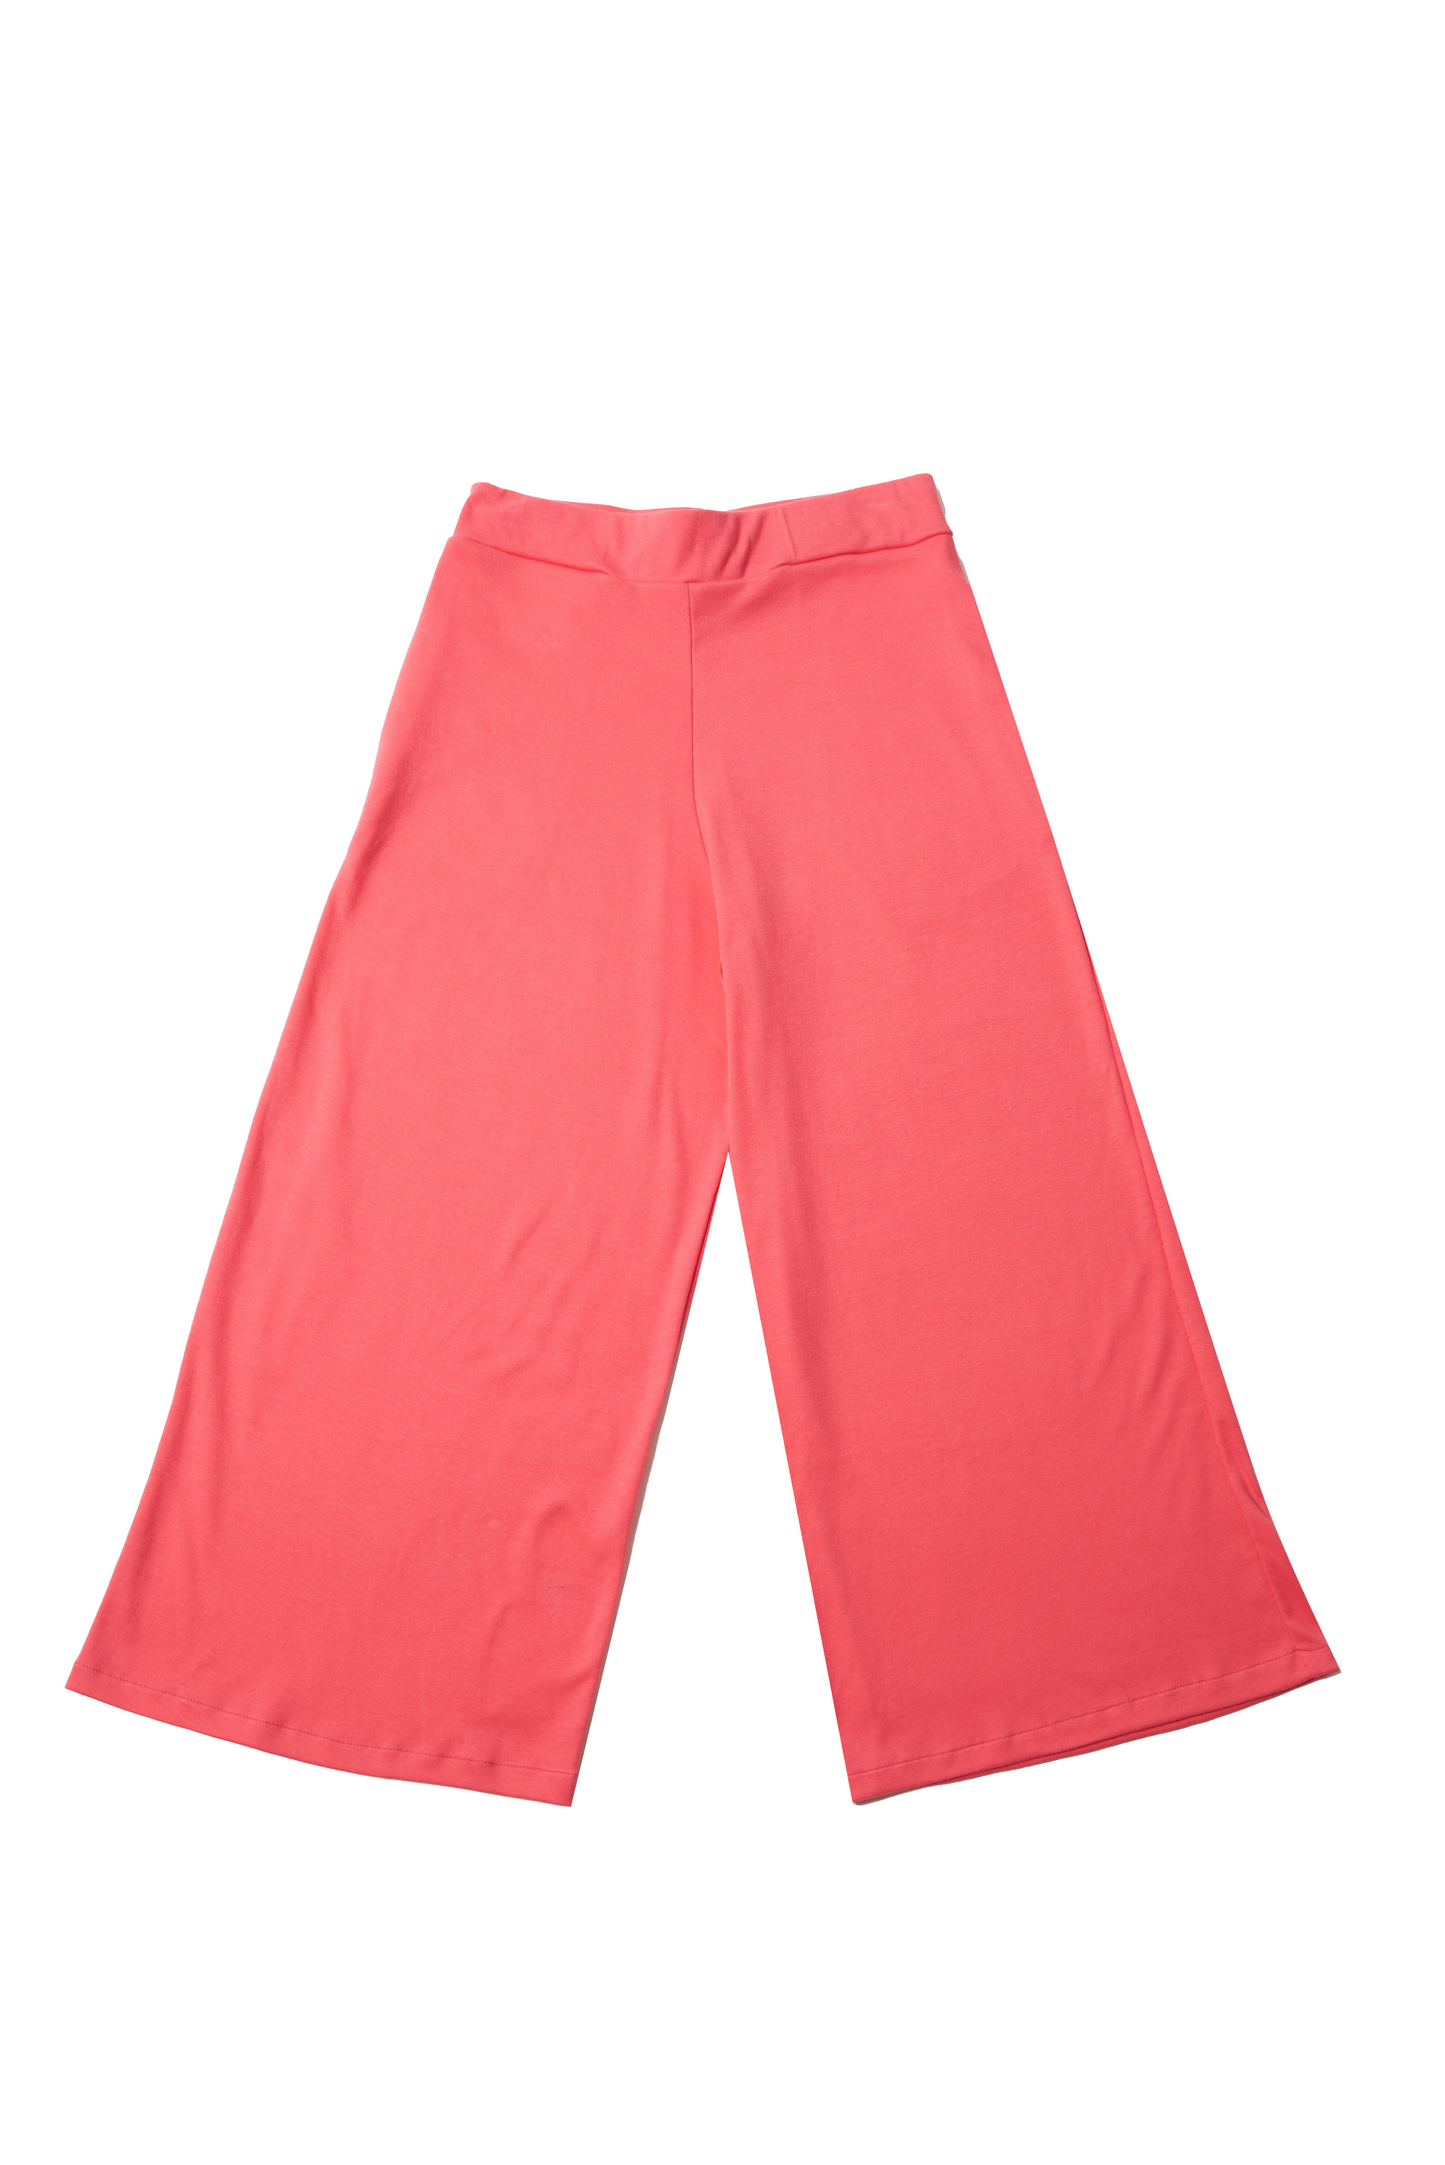 Jersey Lounge Bottom in Bright Pink - Size 10